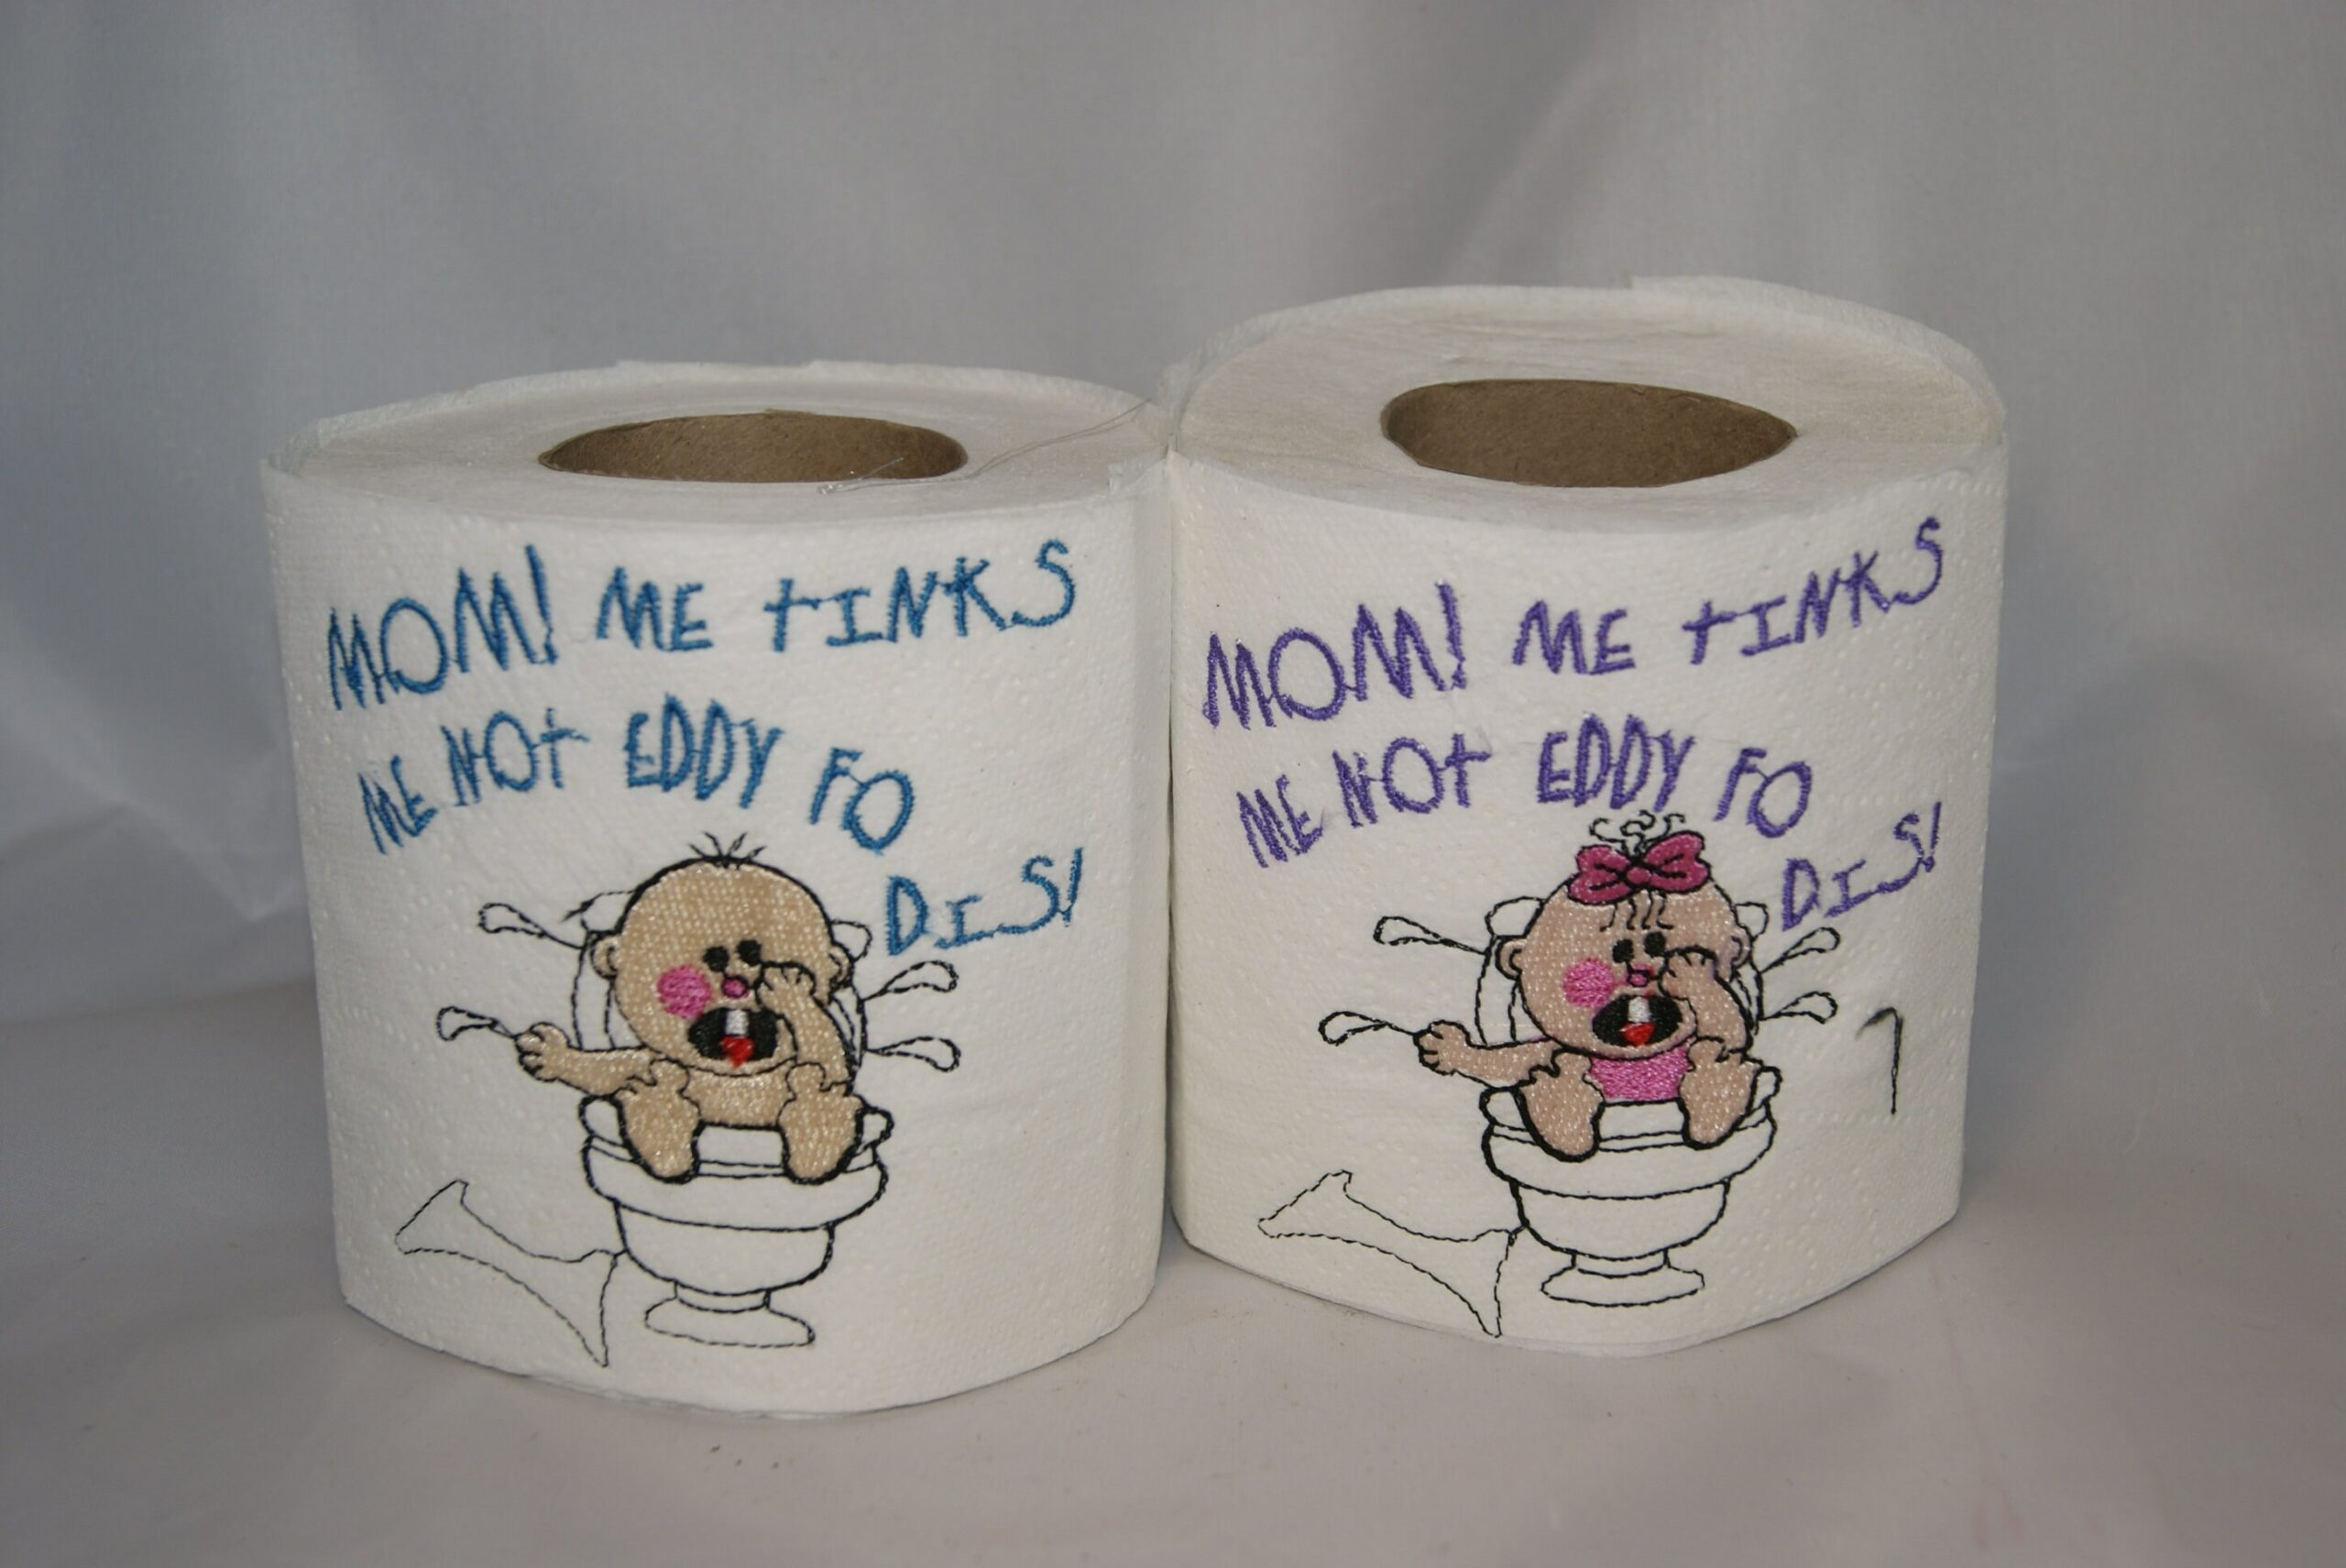 toilet paper baby pictures Embroidery toilet paper designs baby boy designer follow